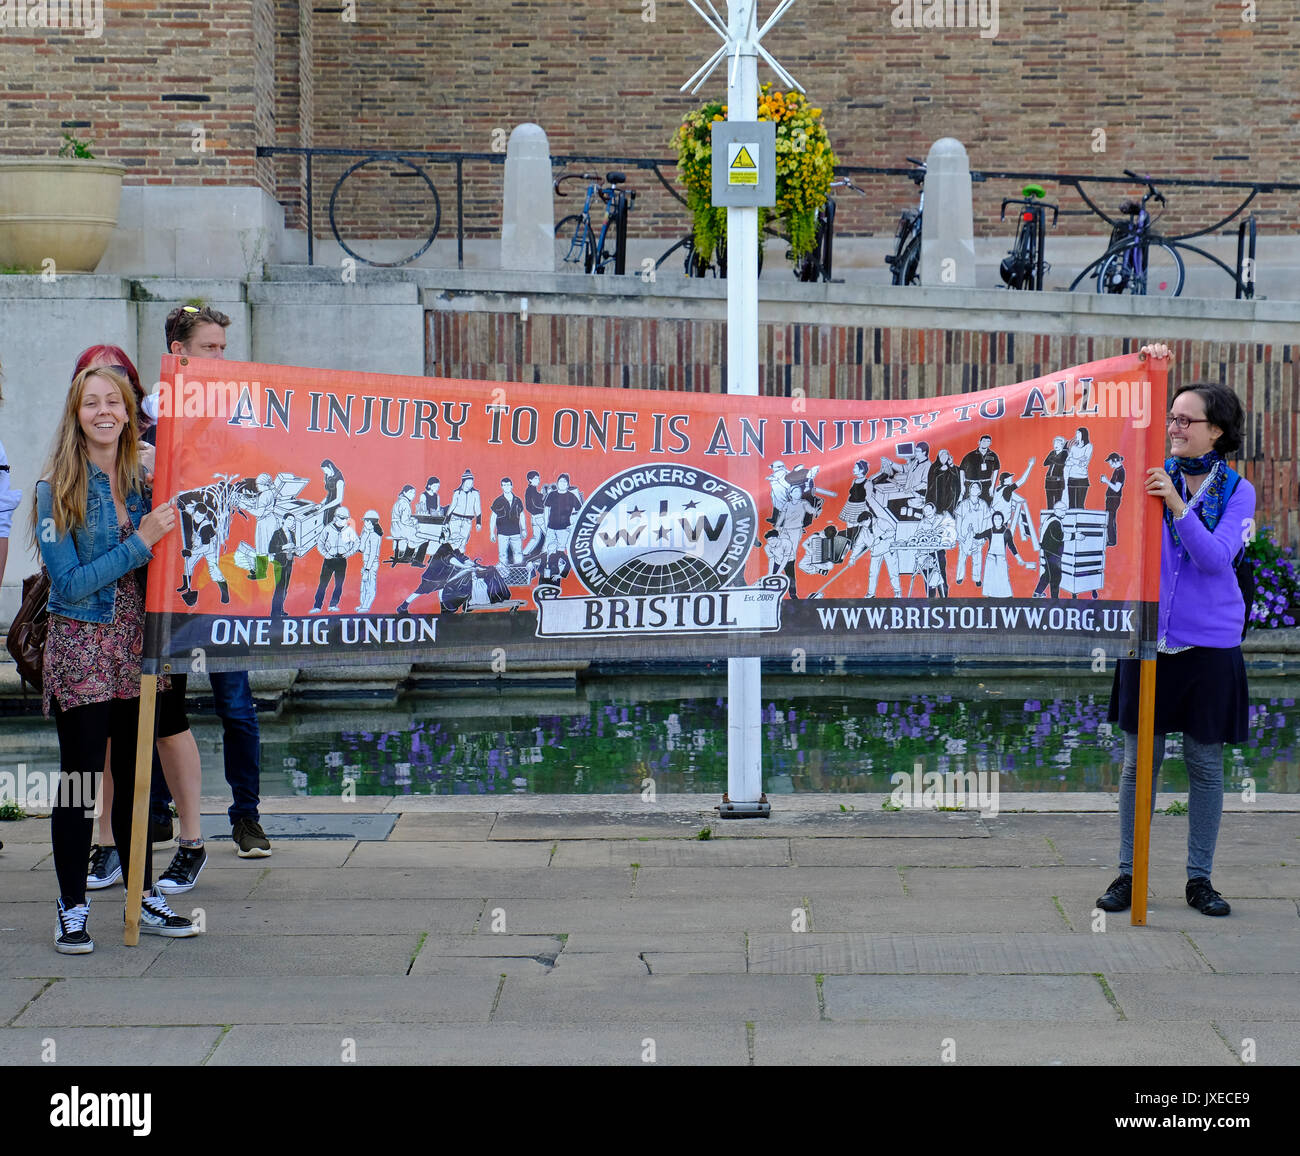 Bristol, UK. 15th August, 2017. Members of the Industrial Workers of the World at a vigil to mark the death of Heather Heyer, who was killed while attending an anti-fascist demonstration in Charlottesville, Virginia, USA. Keith Ramsey/Alamy Live News Stock Photo